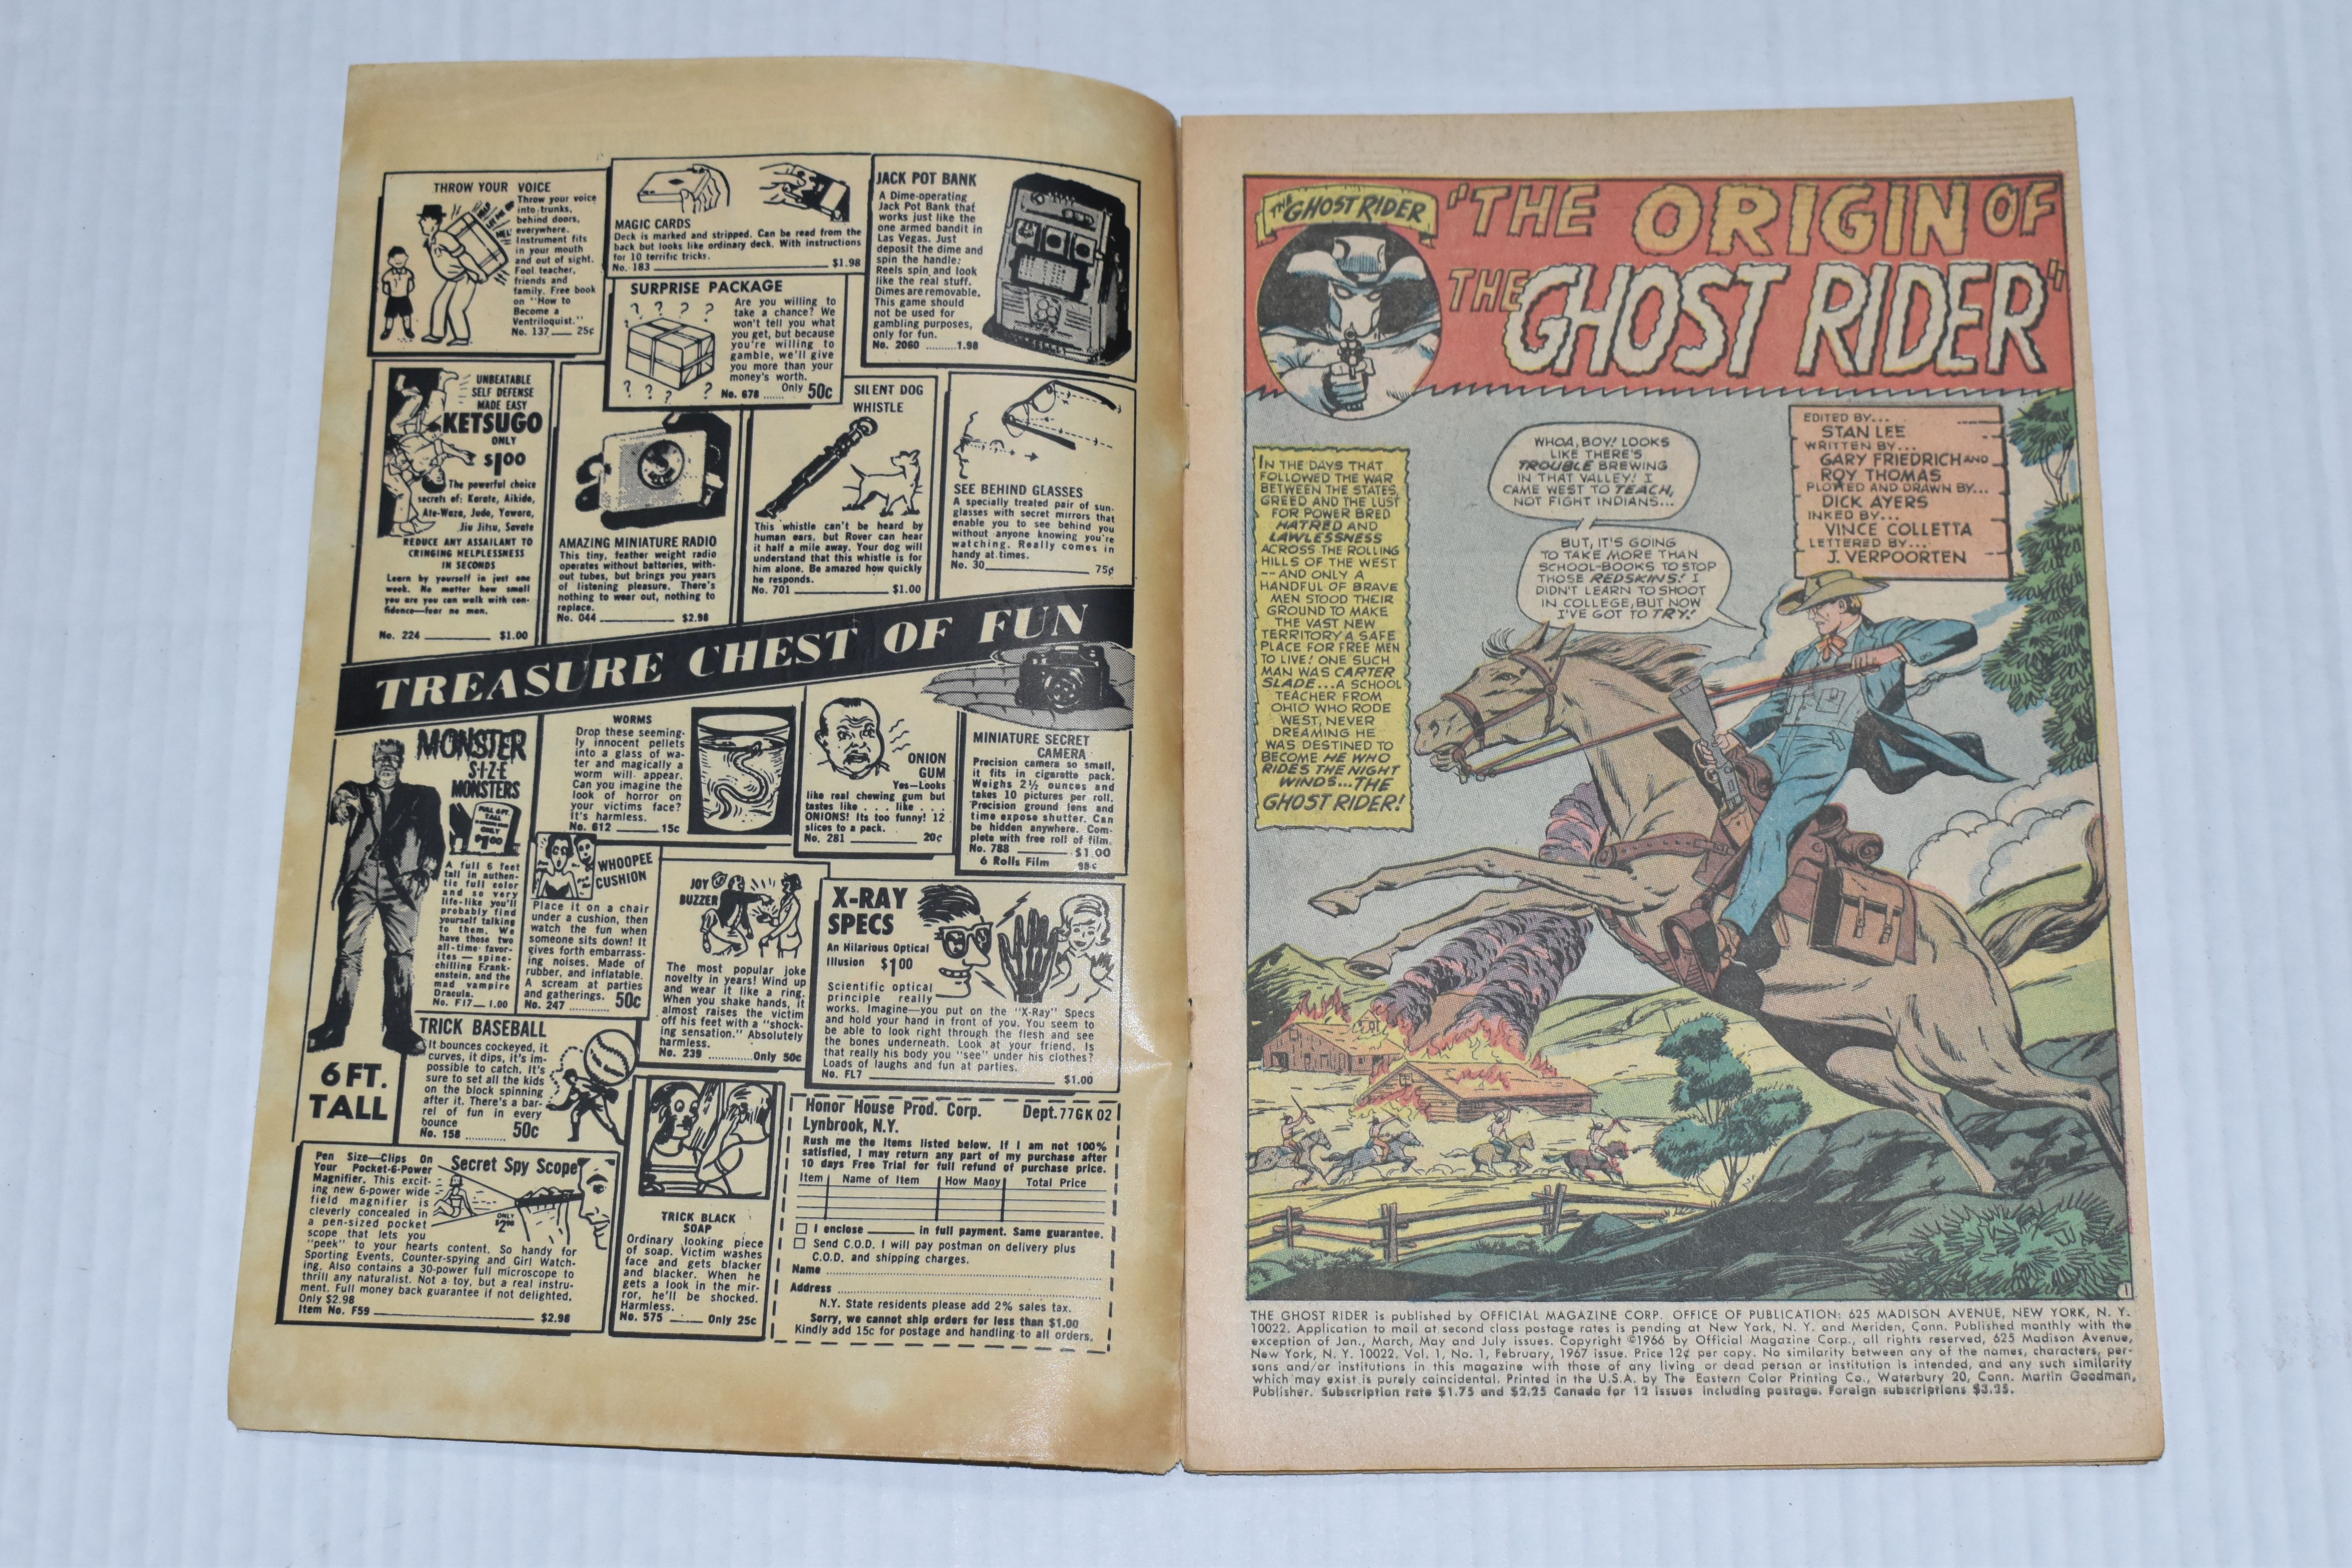 COMPLETE ORIGINAL GHOST RIDER VOLUME 1 MARVEL COMICS, features the first appearance of the - Image 23 of 25